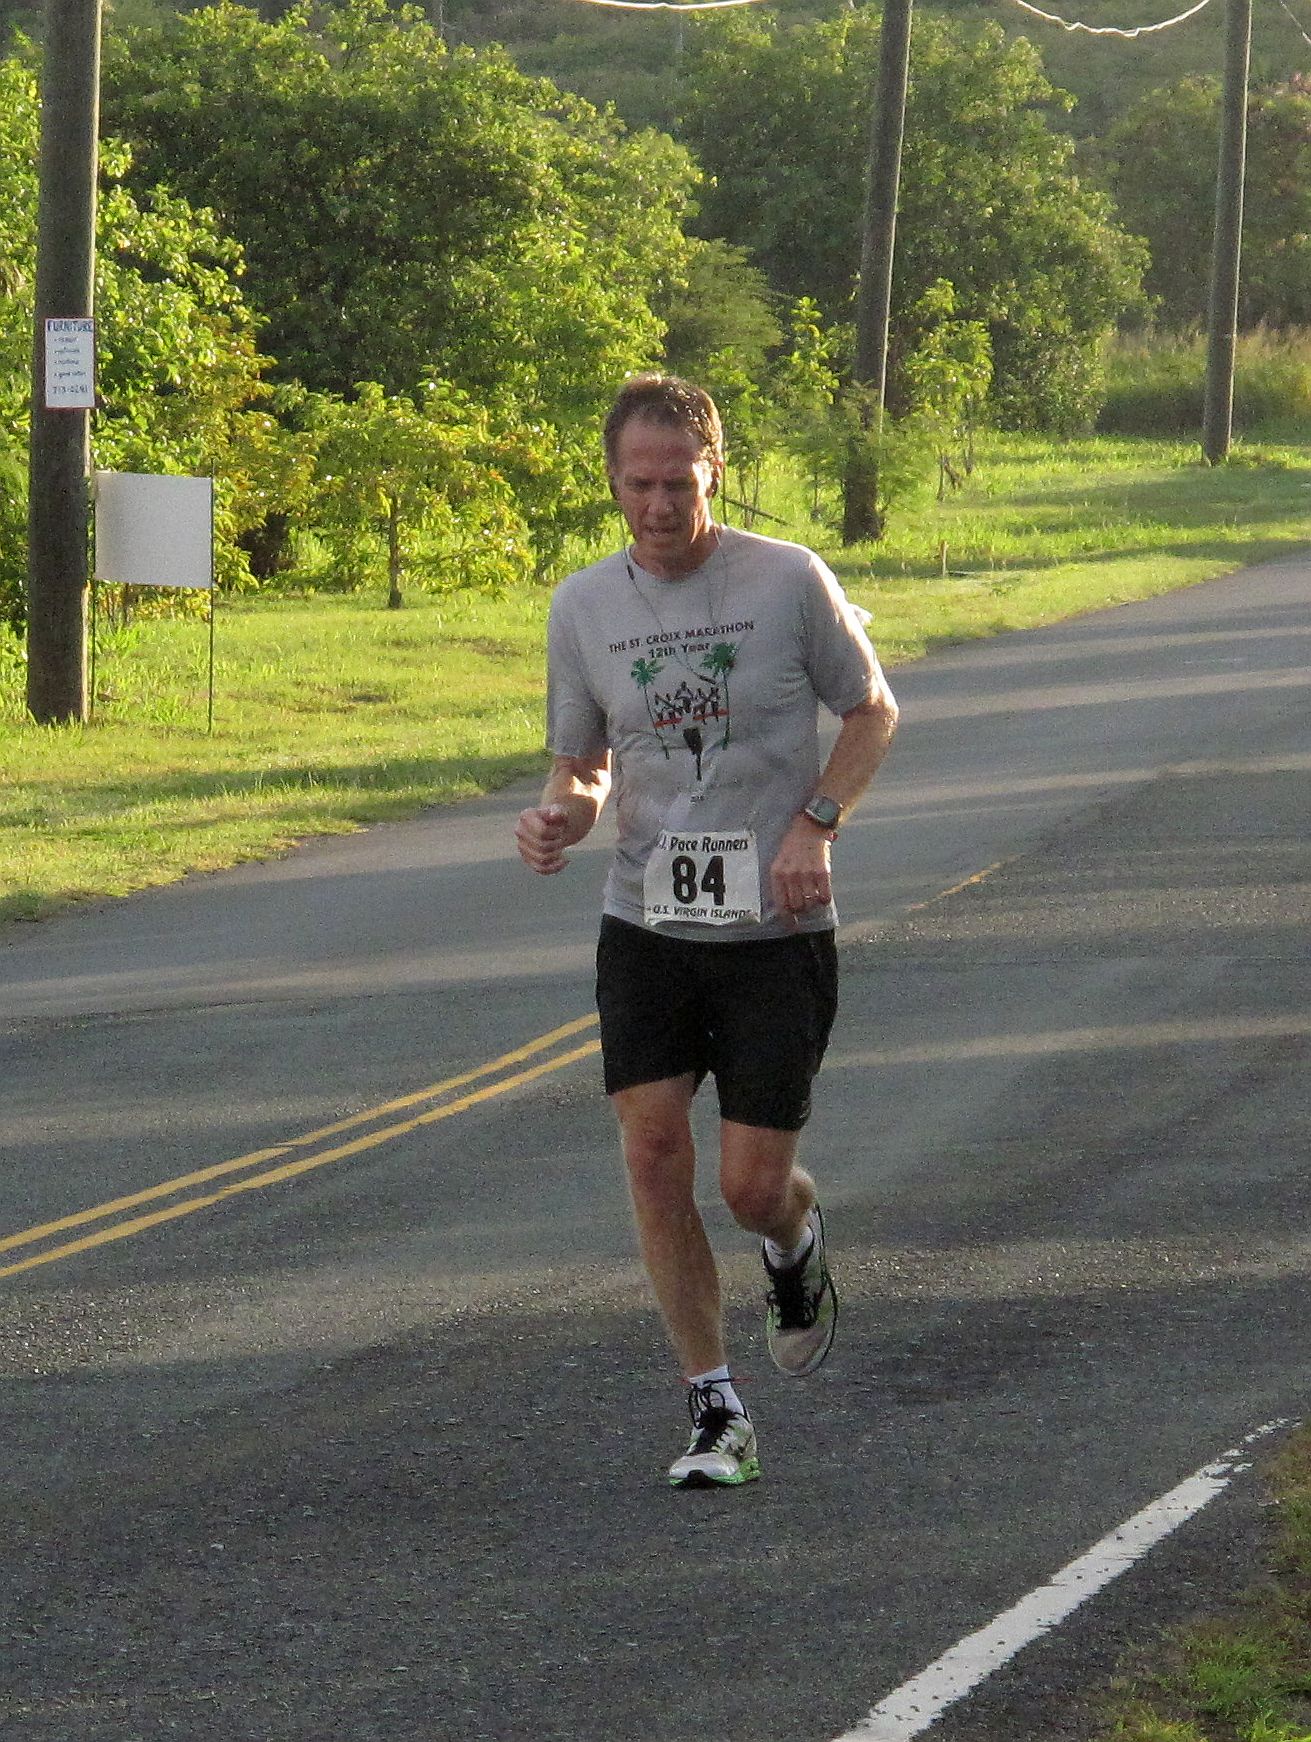 John Harper wins by predicting his time in the West Indies Lab 5-Mile Road Race.